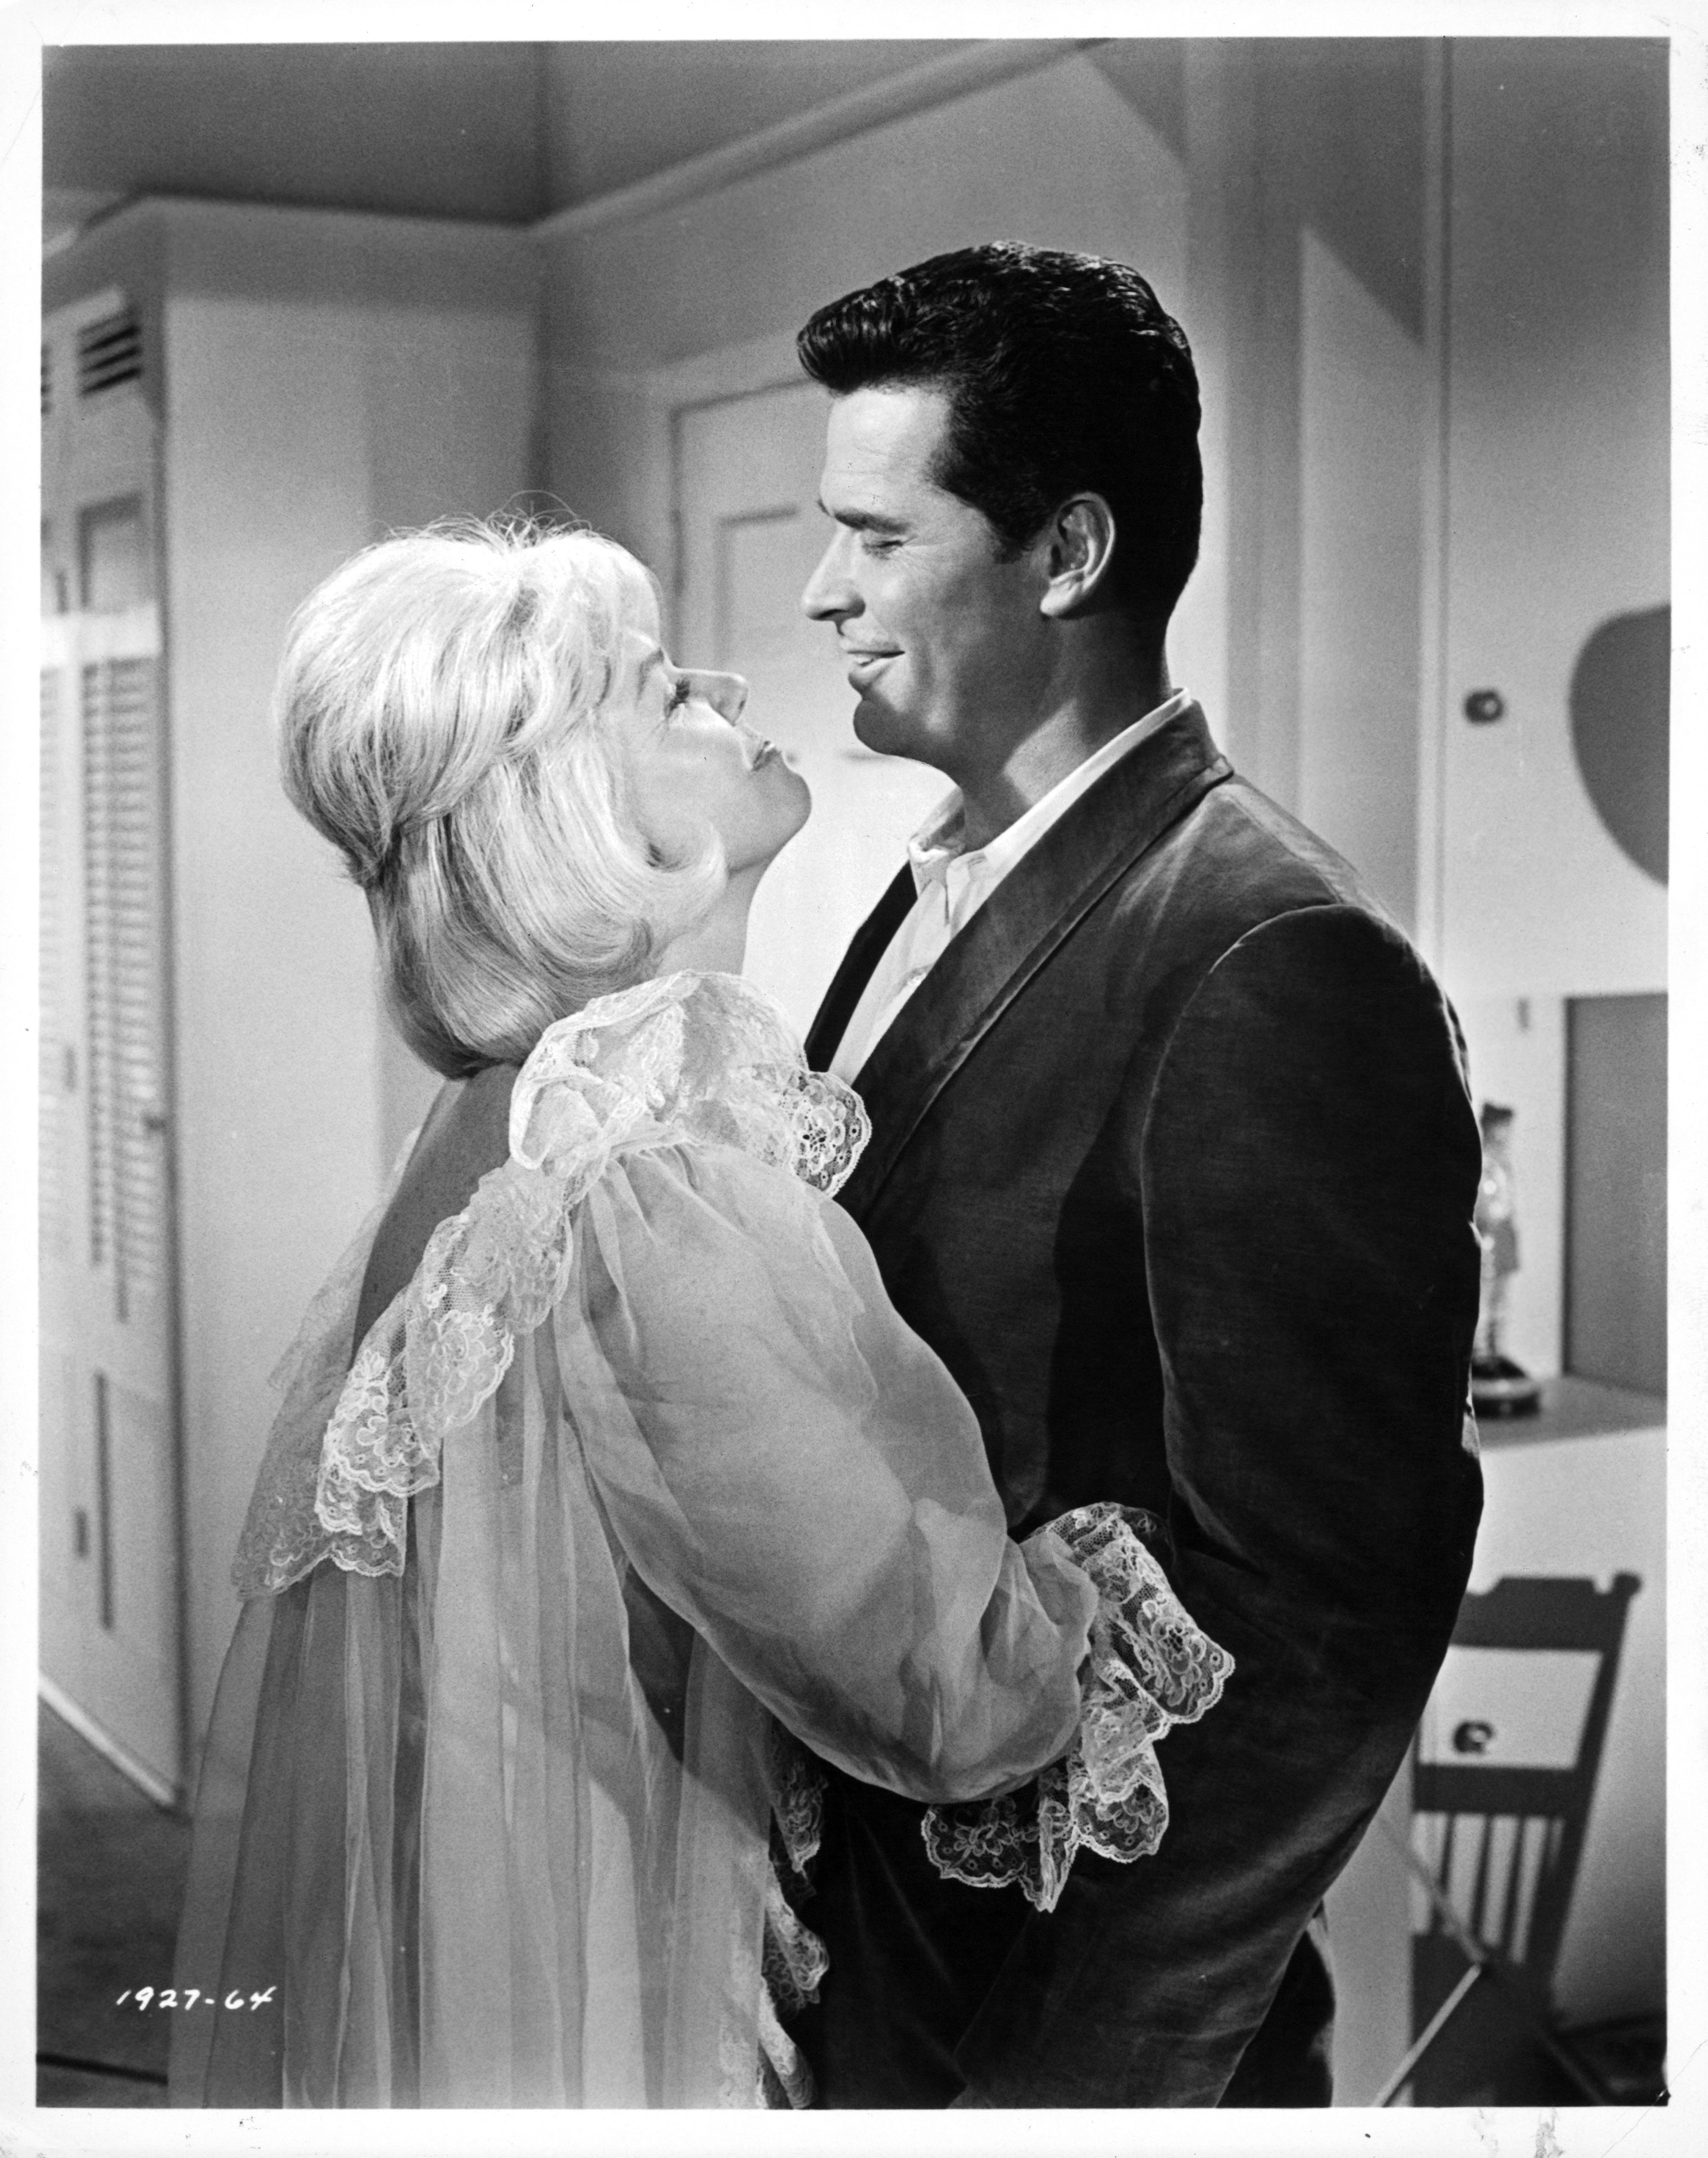 Doris Day and James Garner embracing in a scene from the 1963 film 'The Thrill Of It All.' | Source: Getty Images